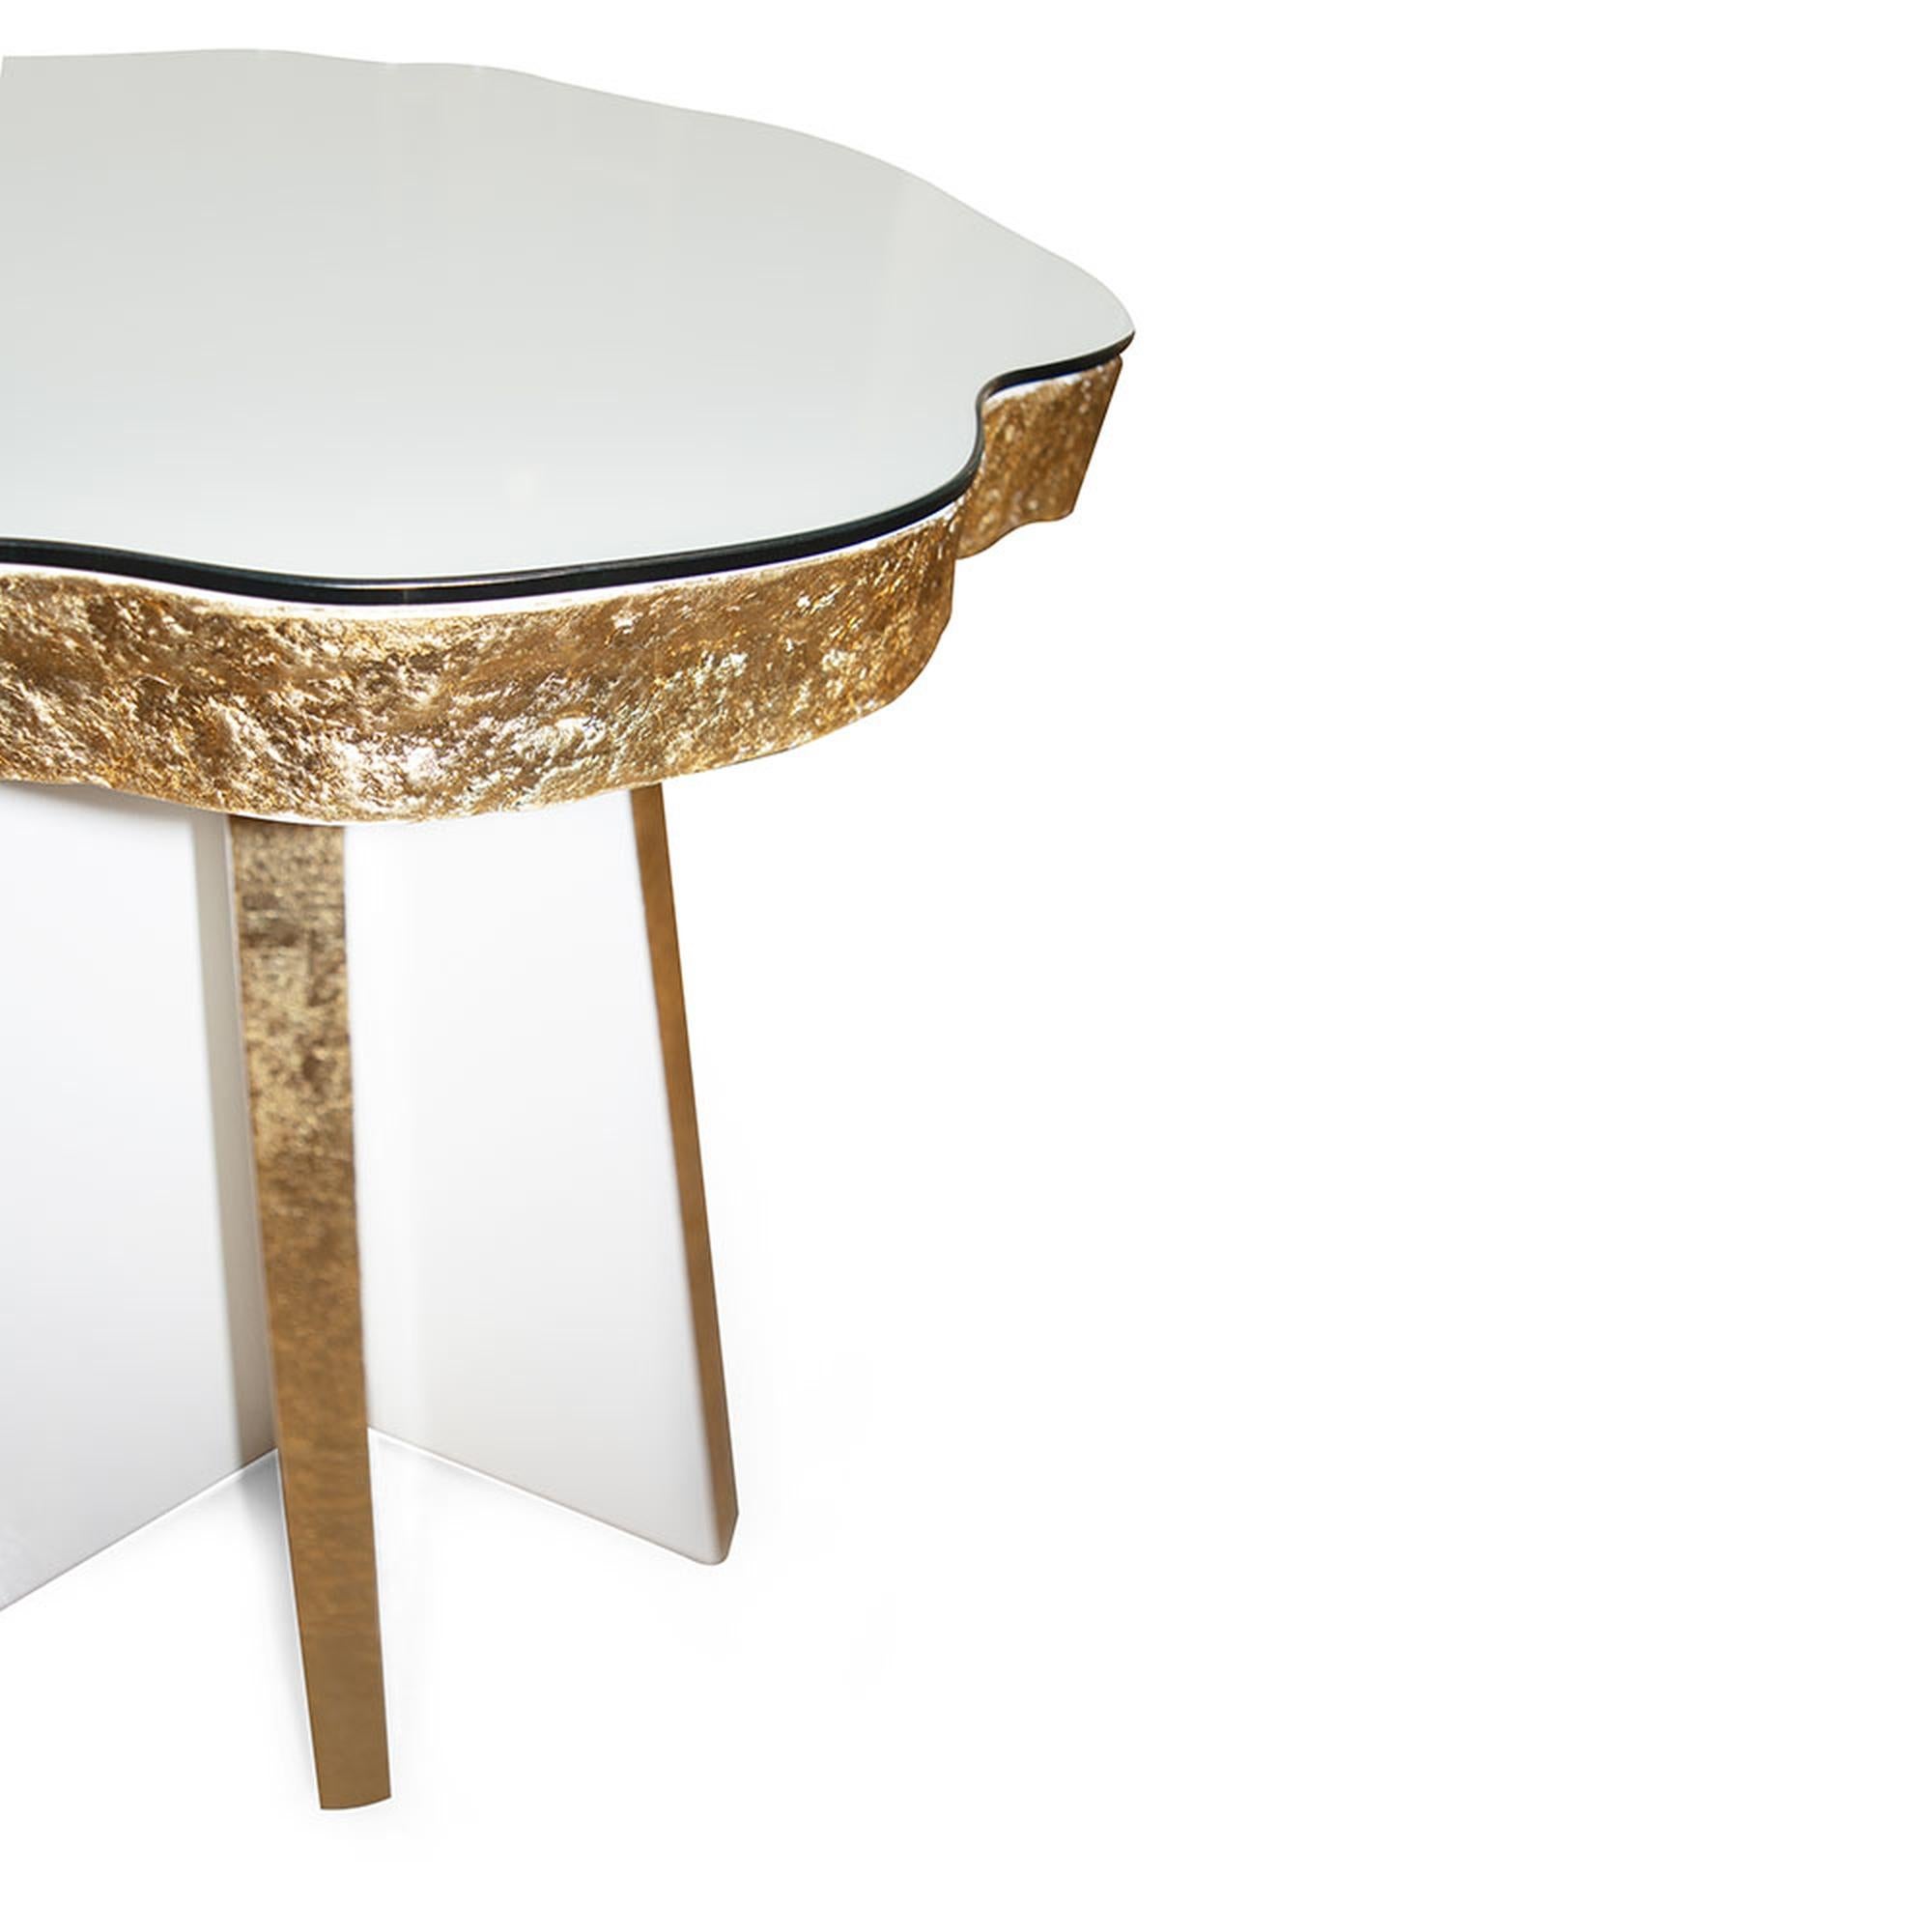 The Palisades accent table I draws attention at rust glance, with its unique and charming design. A smooth top juxtaposed with a concrete, irregular-shaped edge is enveloped in a lacquered finish for a beautiful effect distinctive to this piece. The